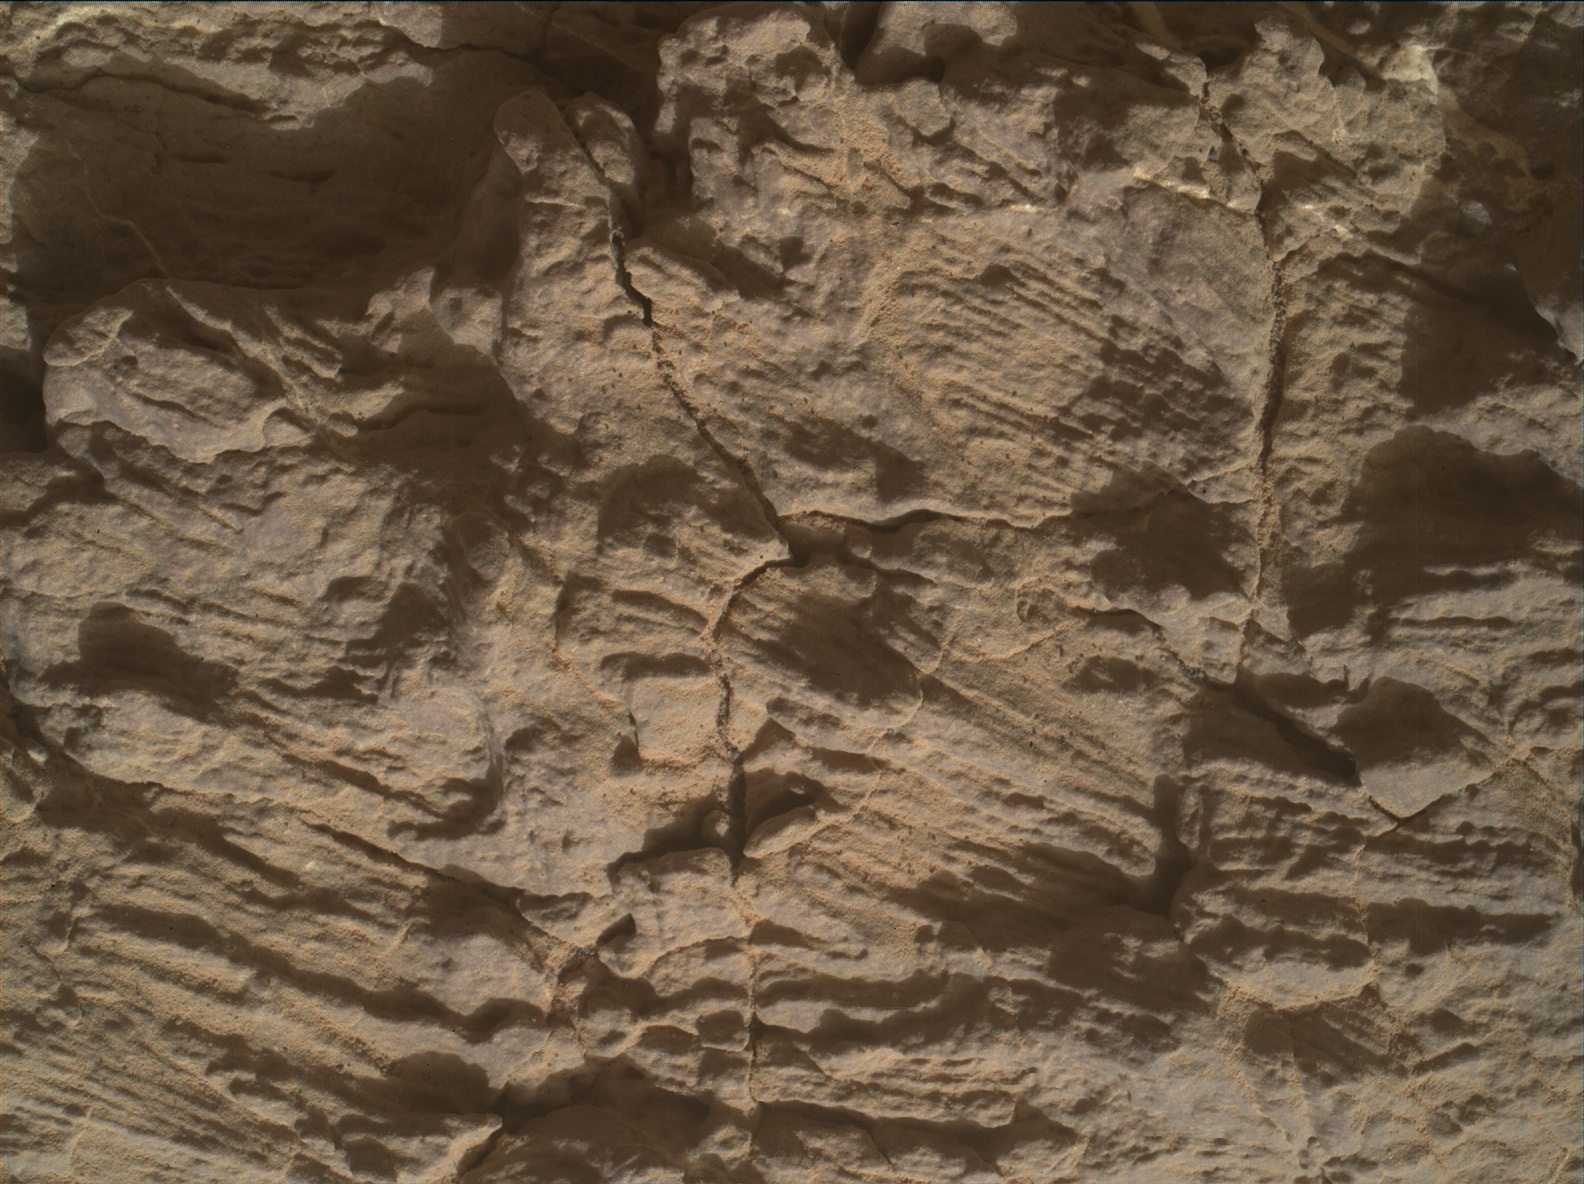 Nasa's Mars rover Curiosity acquired this image using its Mars Hand Lens Imager (MAHLI) on Sol 2453